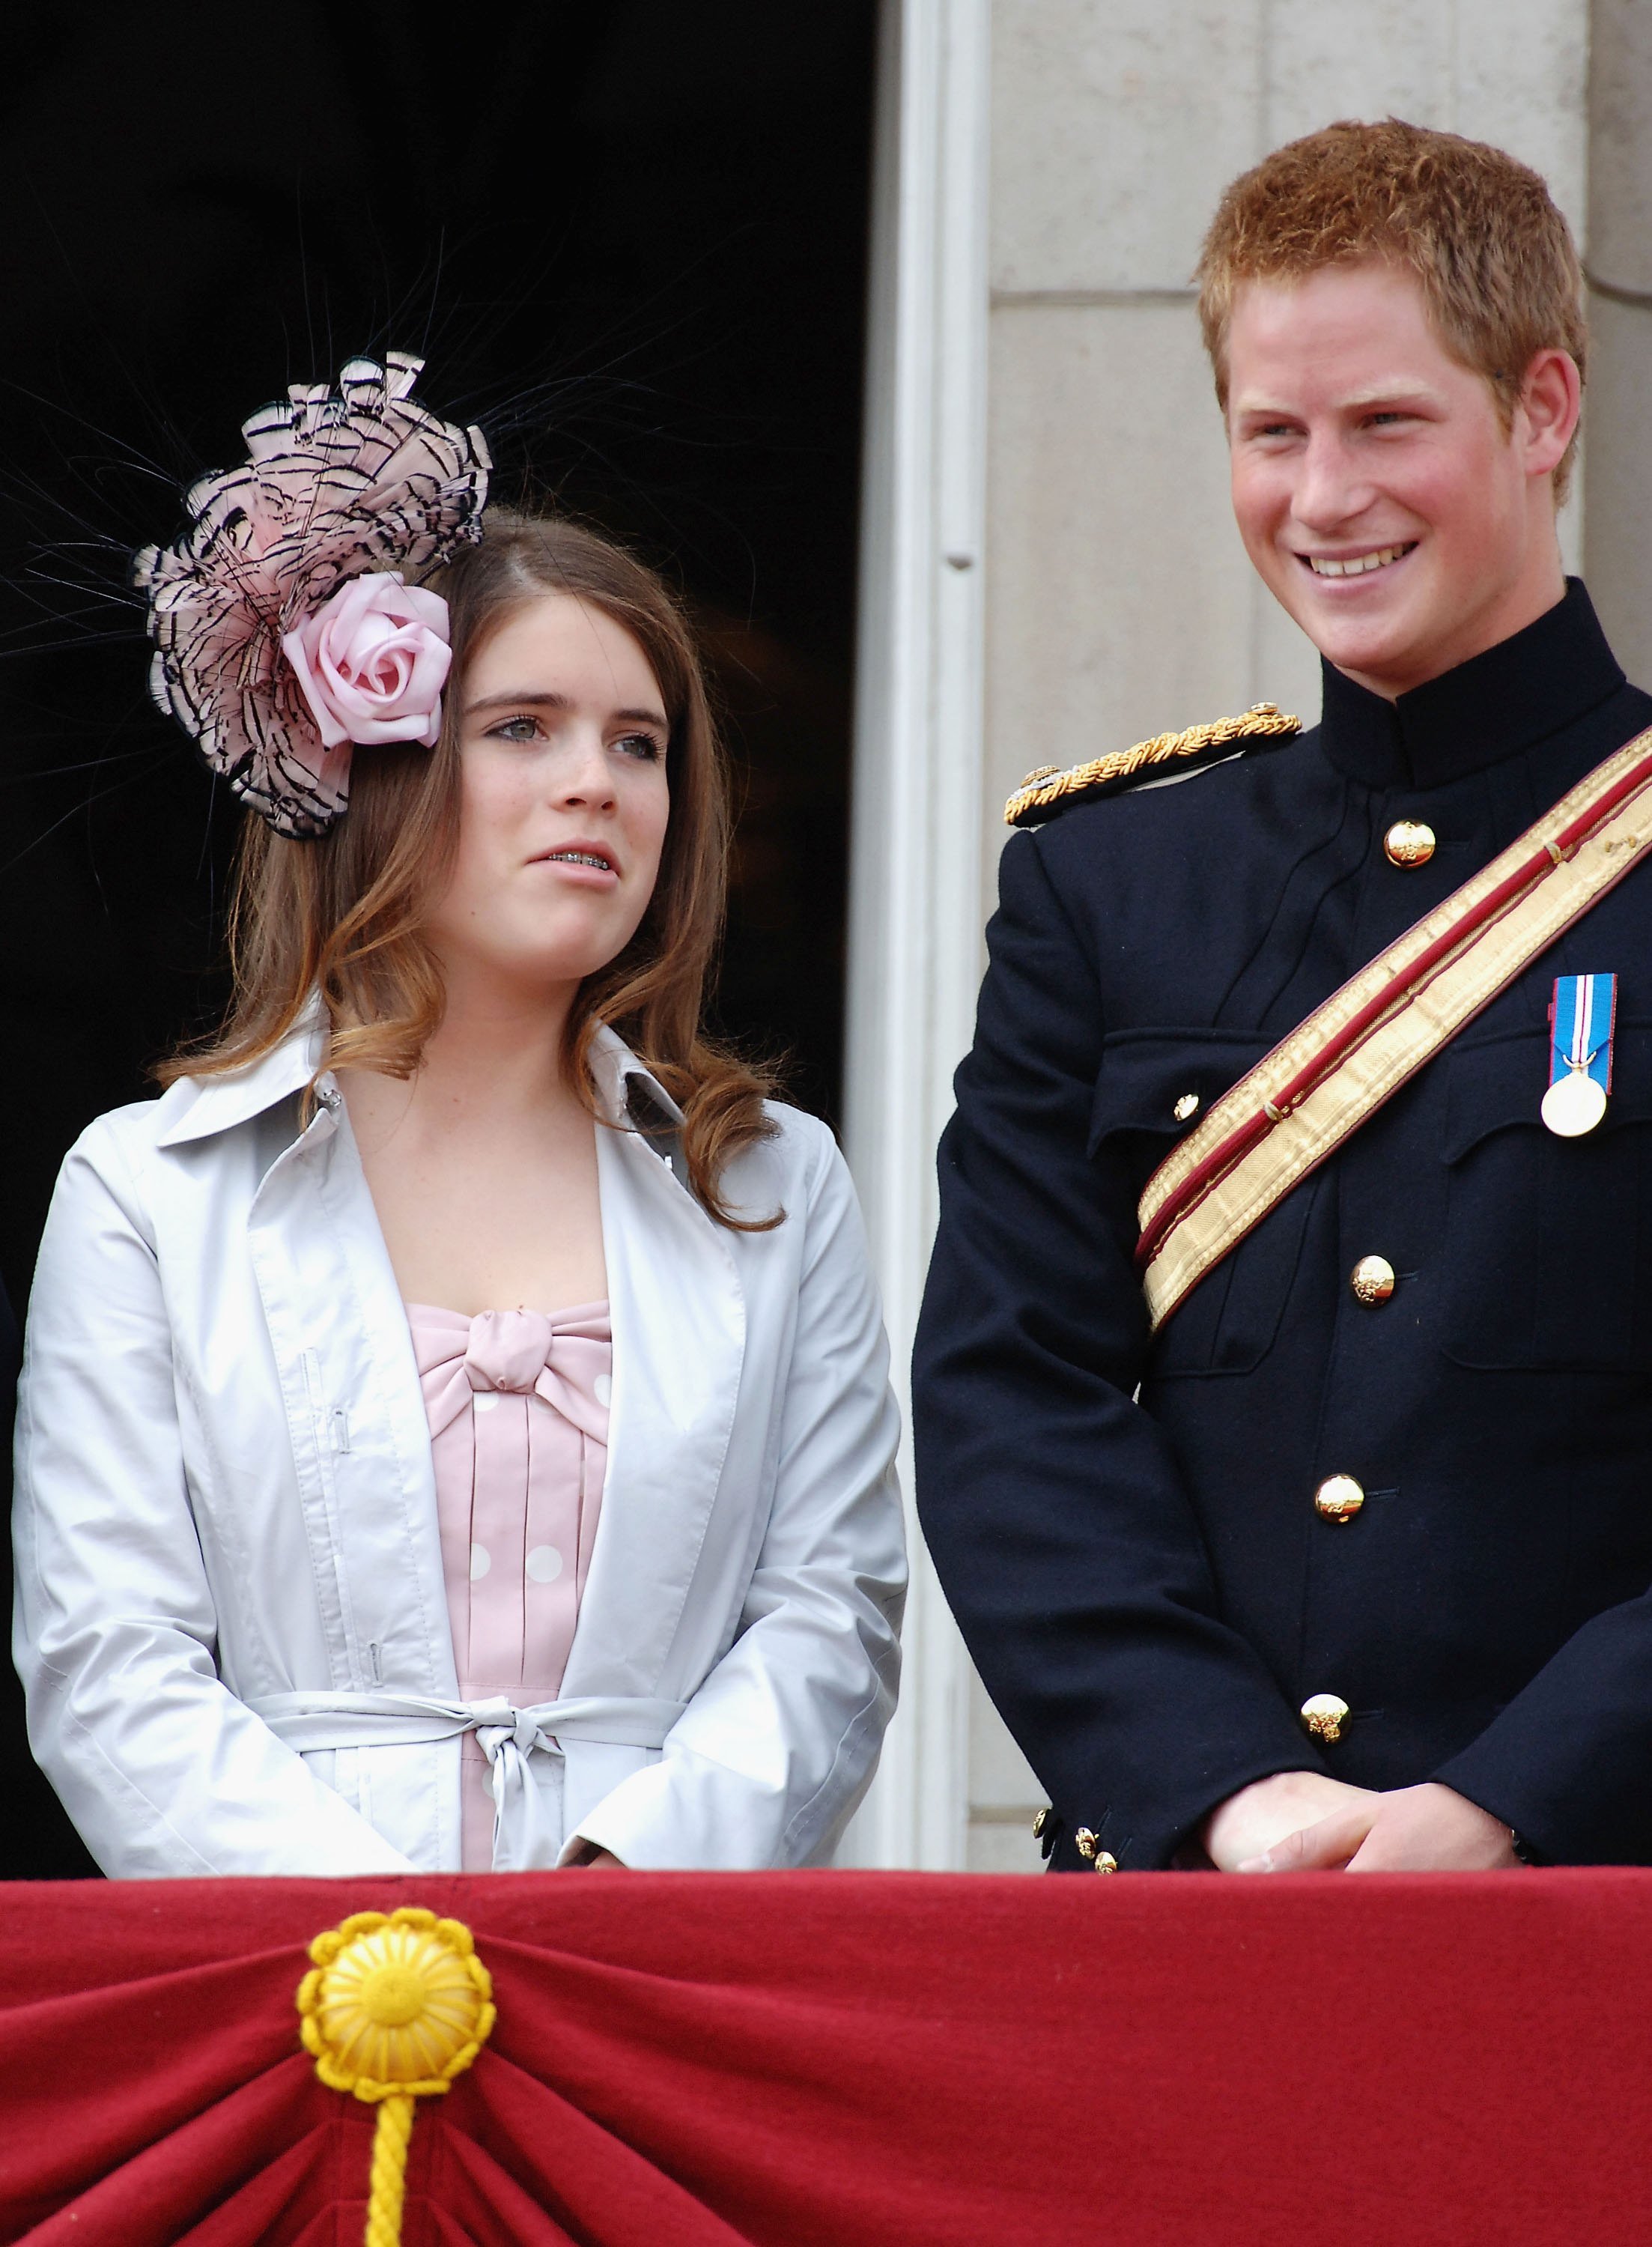 Princess Eugenie and Prince Harry during the Queen's Birthday Parade and Trooping The Colour at Buckingham Palace on June 17, 2006, in London, England. | Source: Anwar Hussein/Getty Images